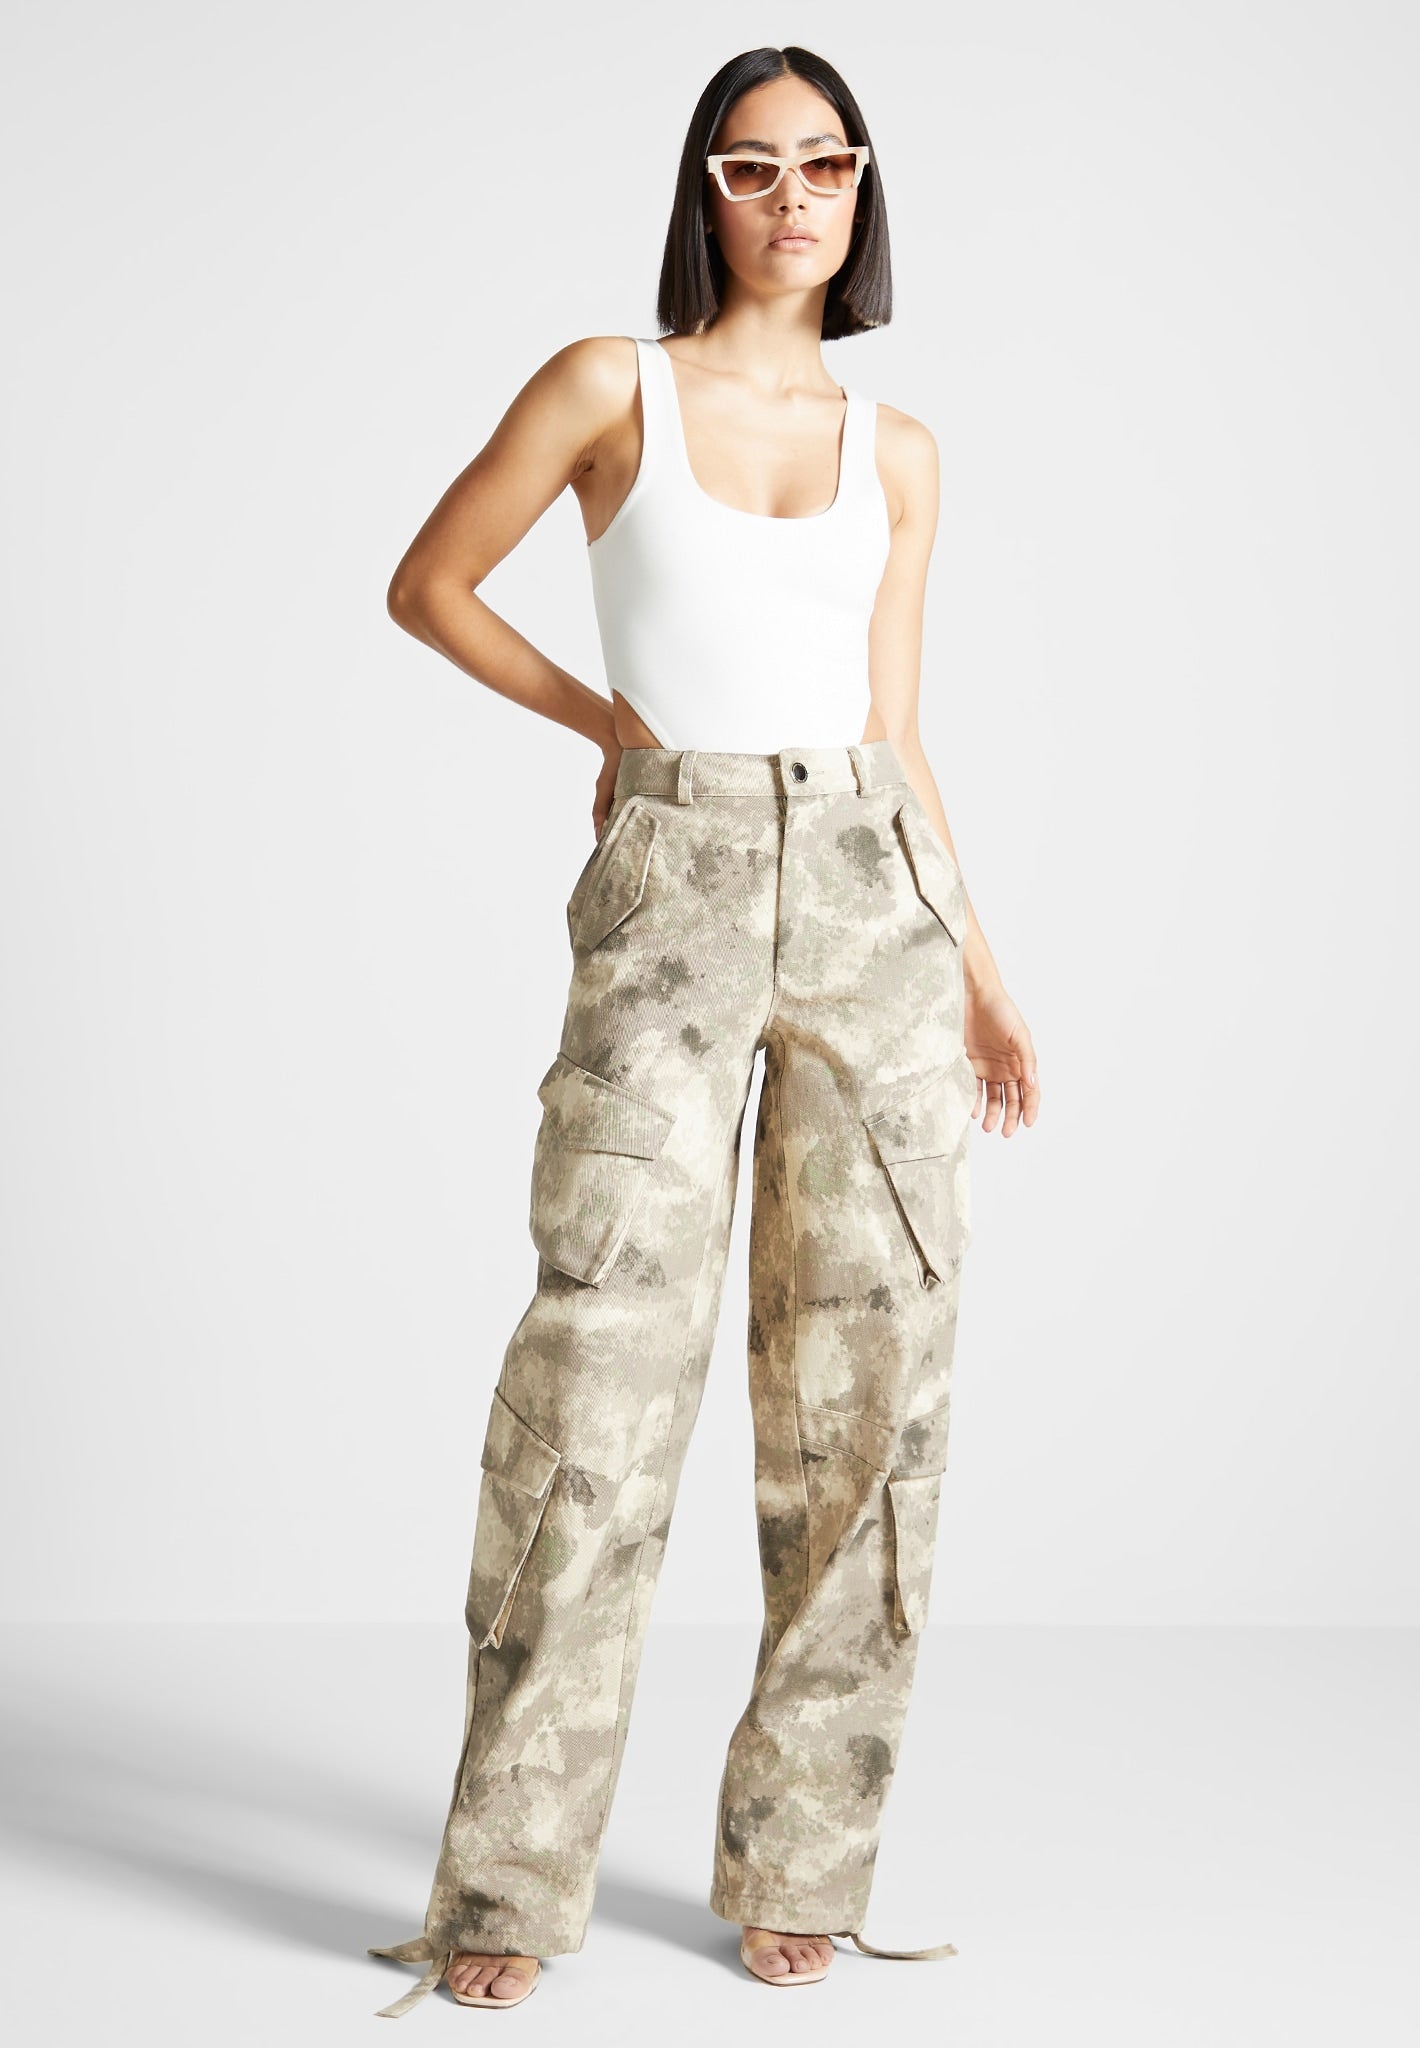 Beige Flared Cargo Pants Camo Bellbottom Low Rise Trousers 